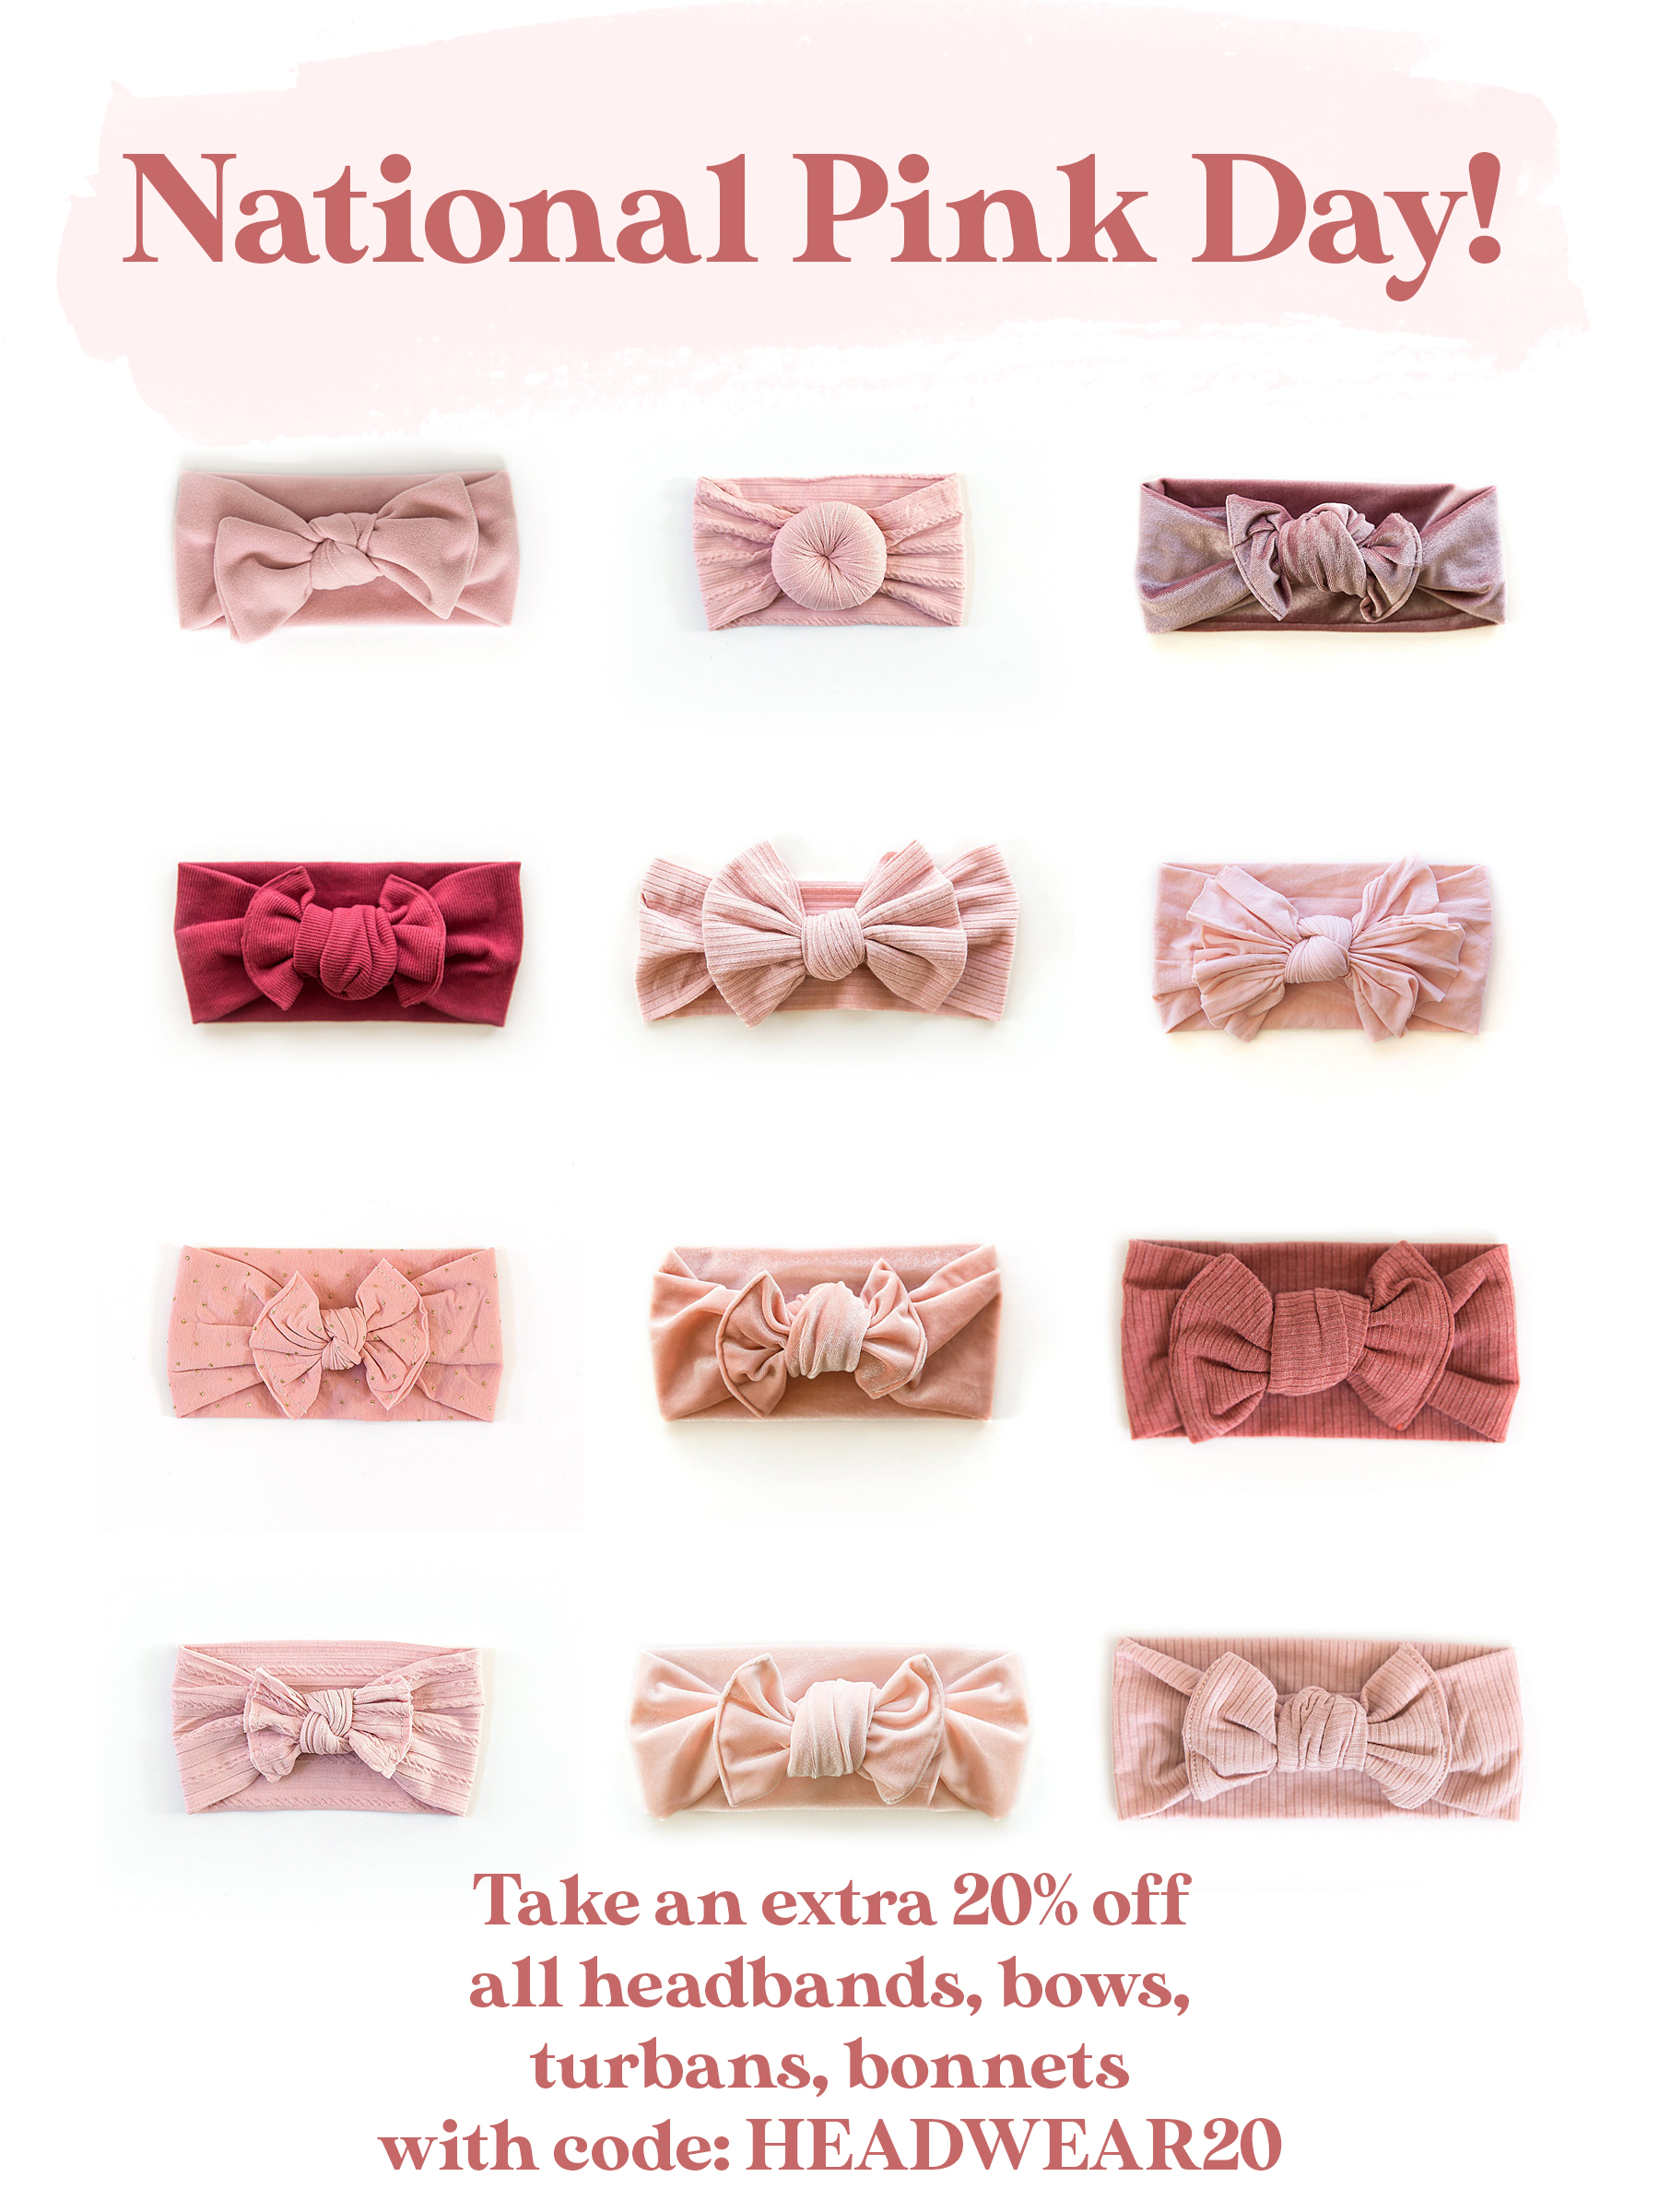 National Pink Day! Take an extra 20% off all headbands, bows, turbans, bonnets with code: HEADWEAR20 